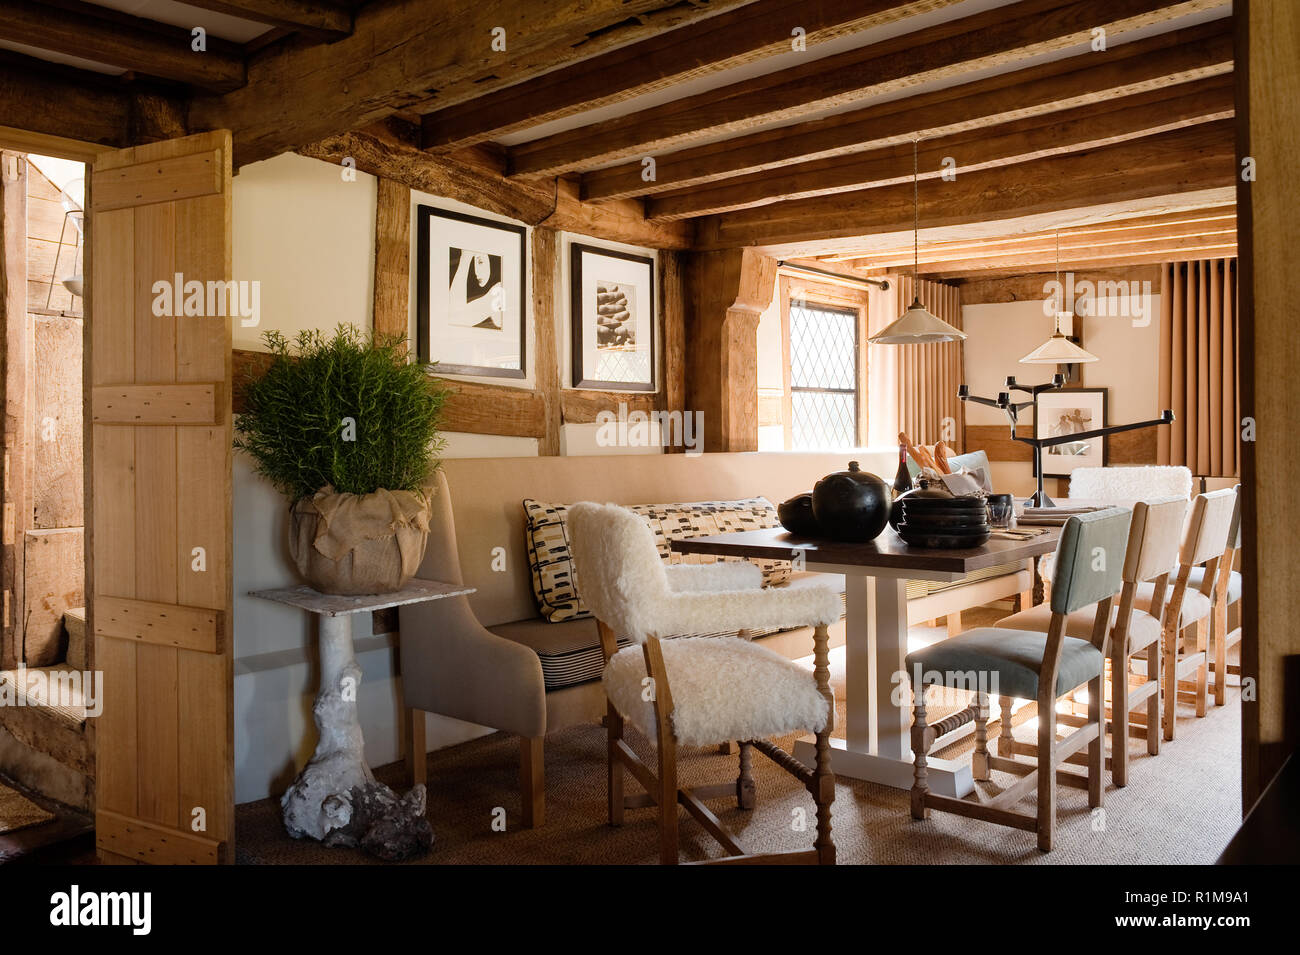 Rustic dining room Stock Photo